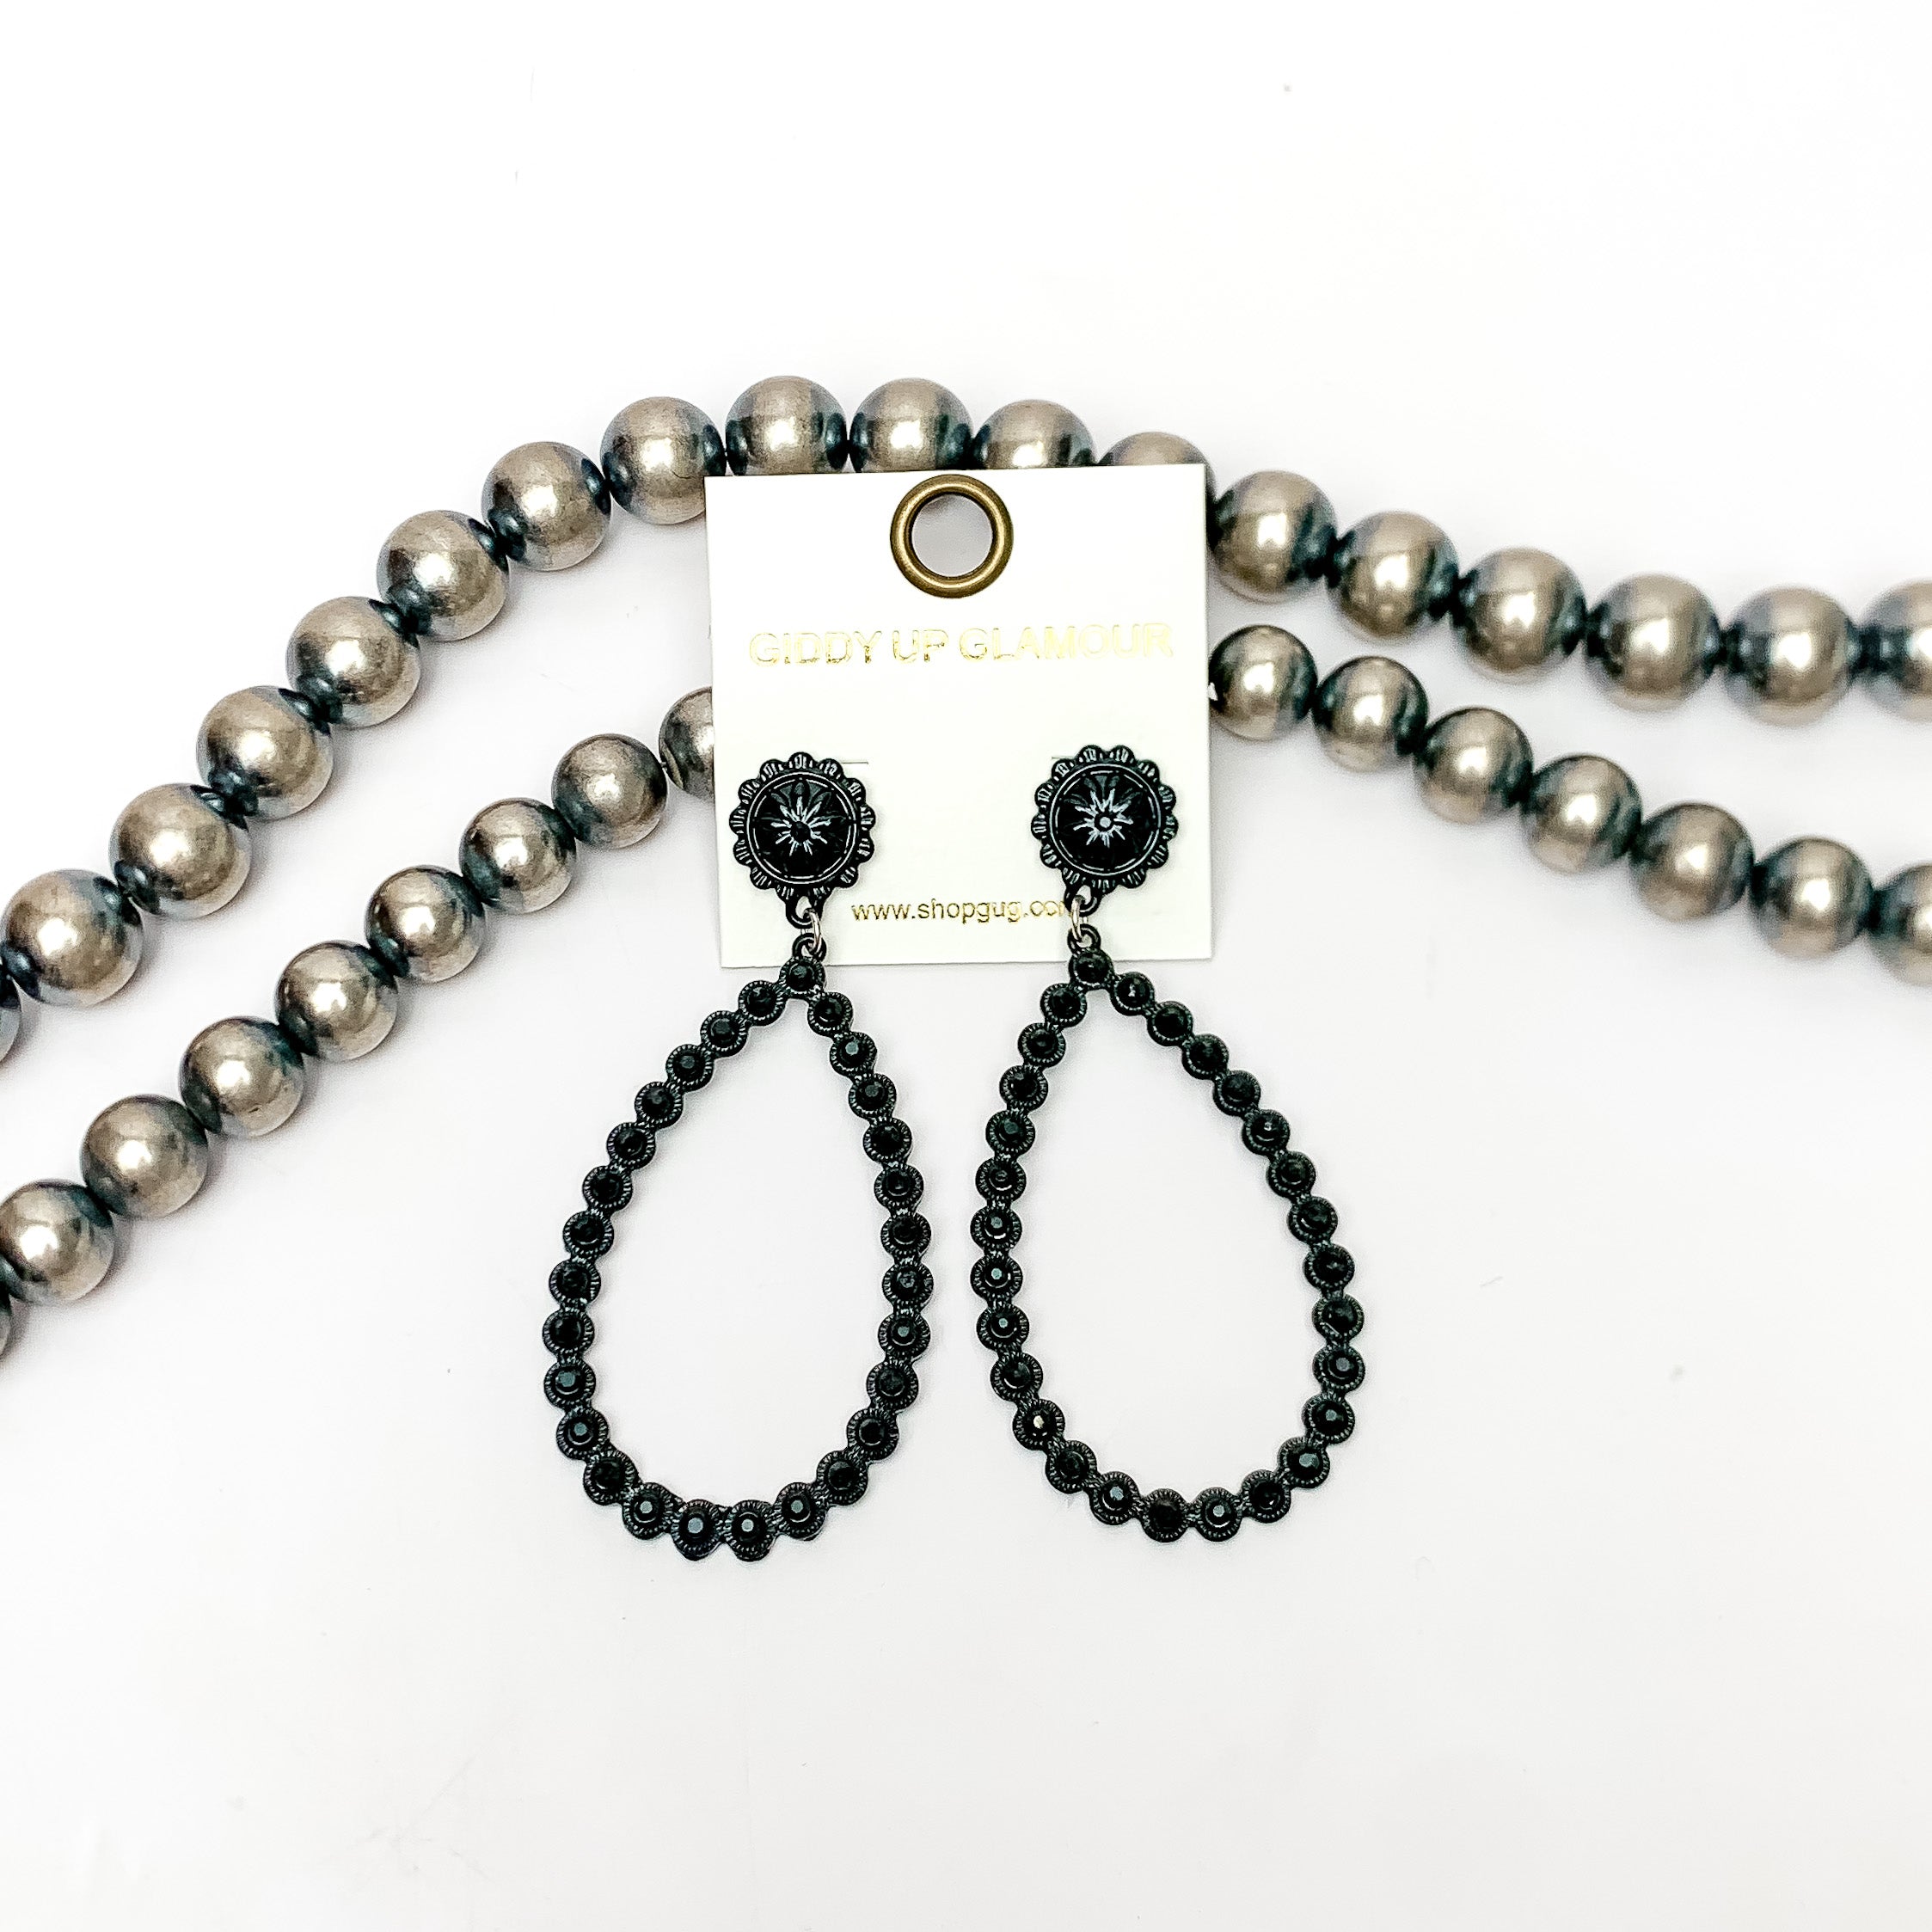 AB Crystal Open Teardrop Earrings in Black. These open ab crystal teardrop earrings are pictured on a white background with Navajo pearls behind the earrings.